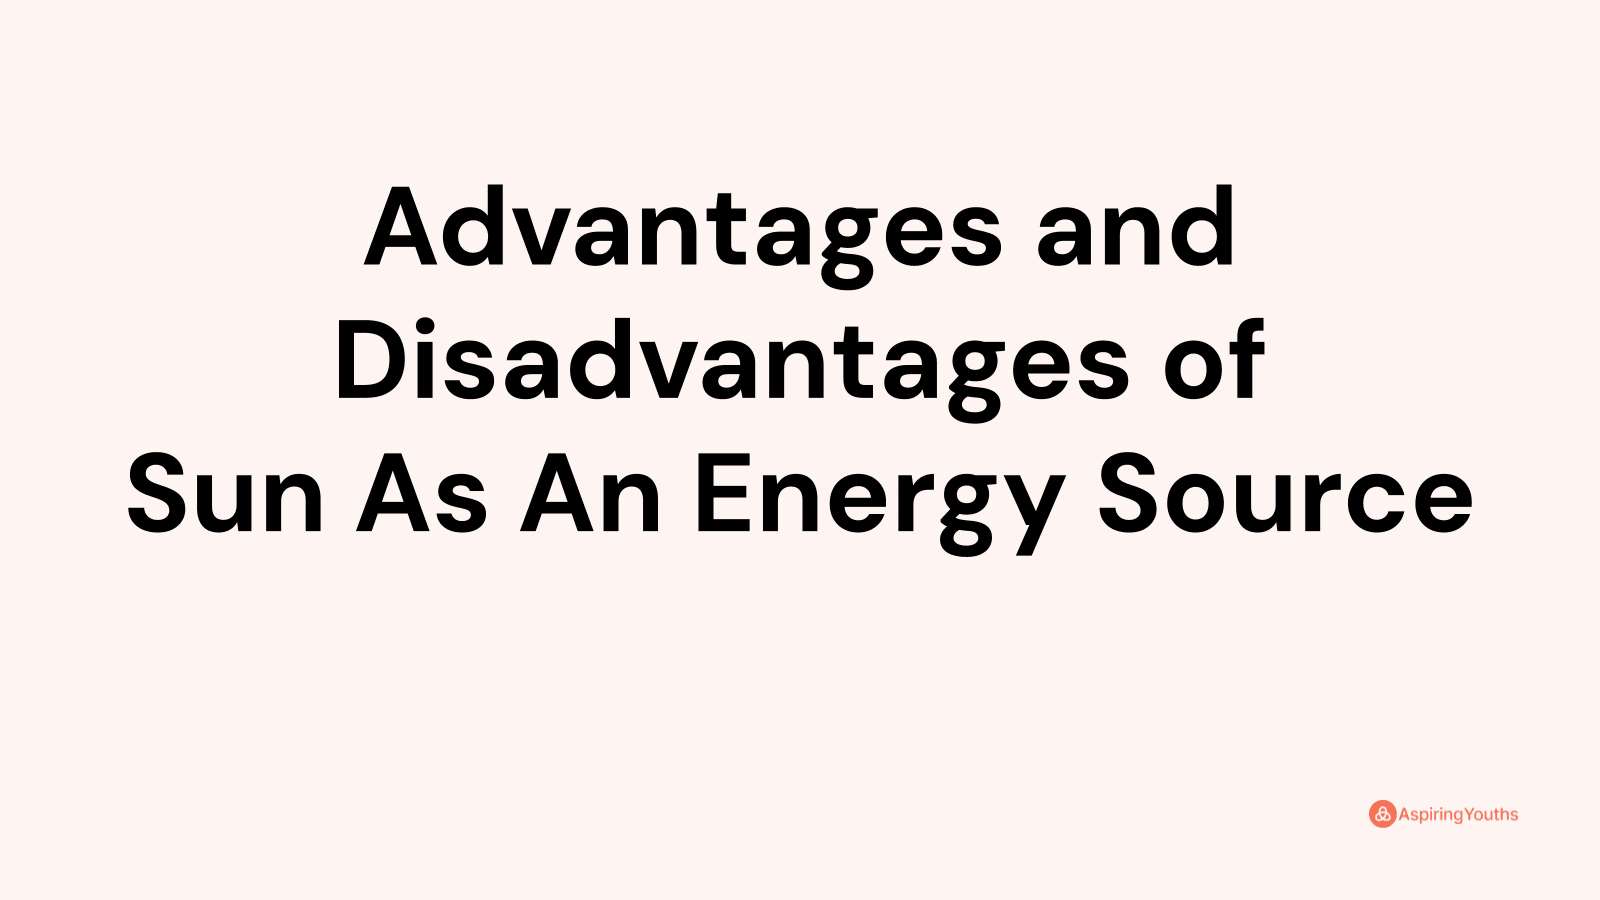 Advantages and disadvantages of Sun As An Energy Source